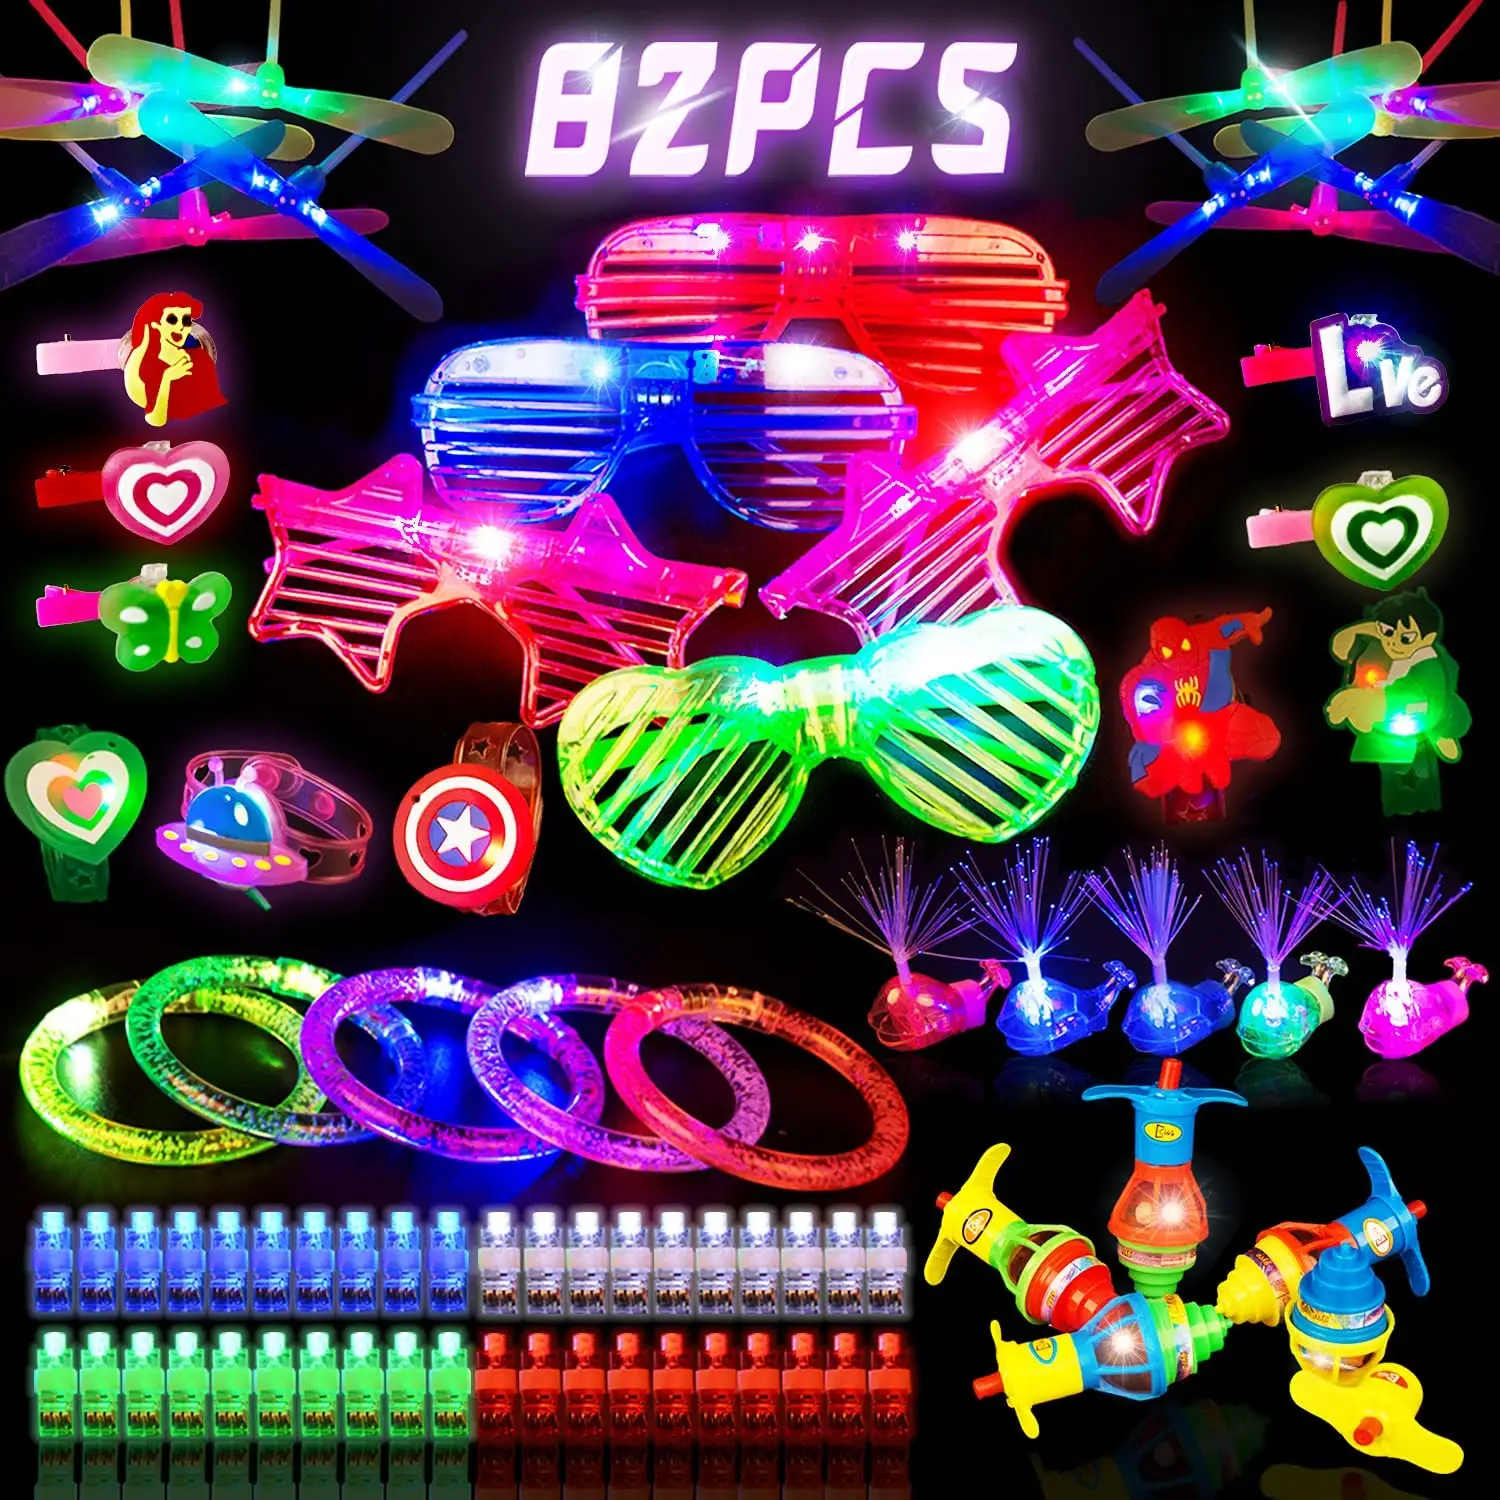 Partycool In The Dark Glow Party Supplies Neon Style Light Up Glasses Bracelets Finger Hairpins Party Favors For Kids Adults